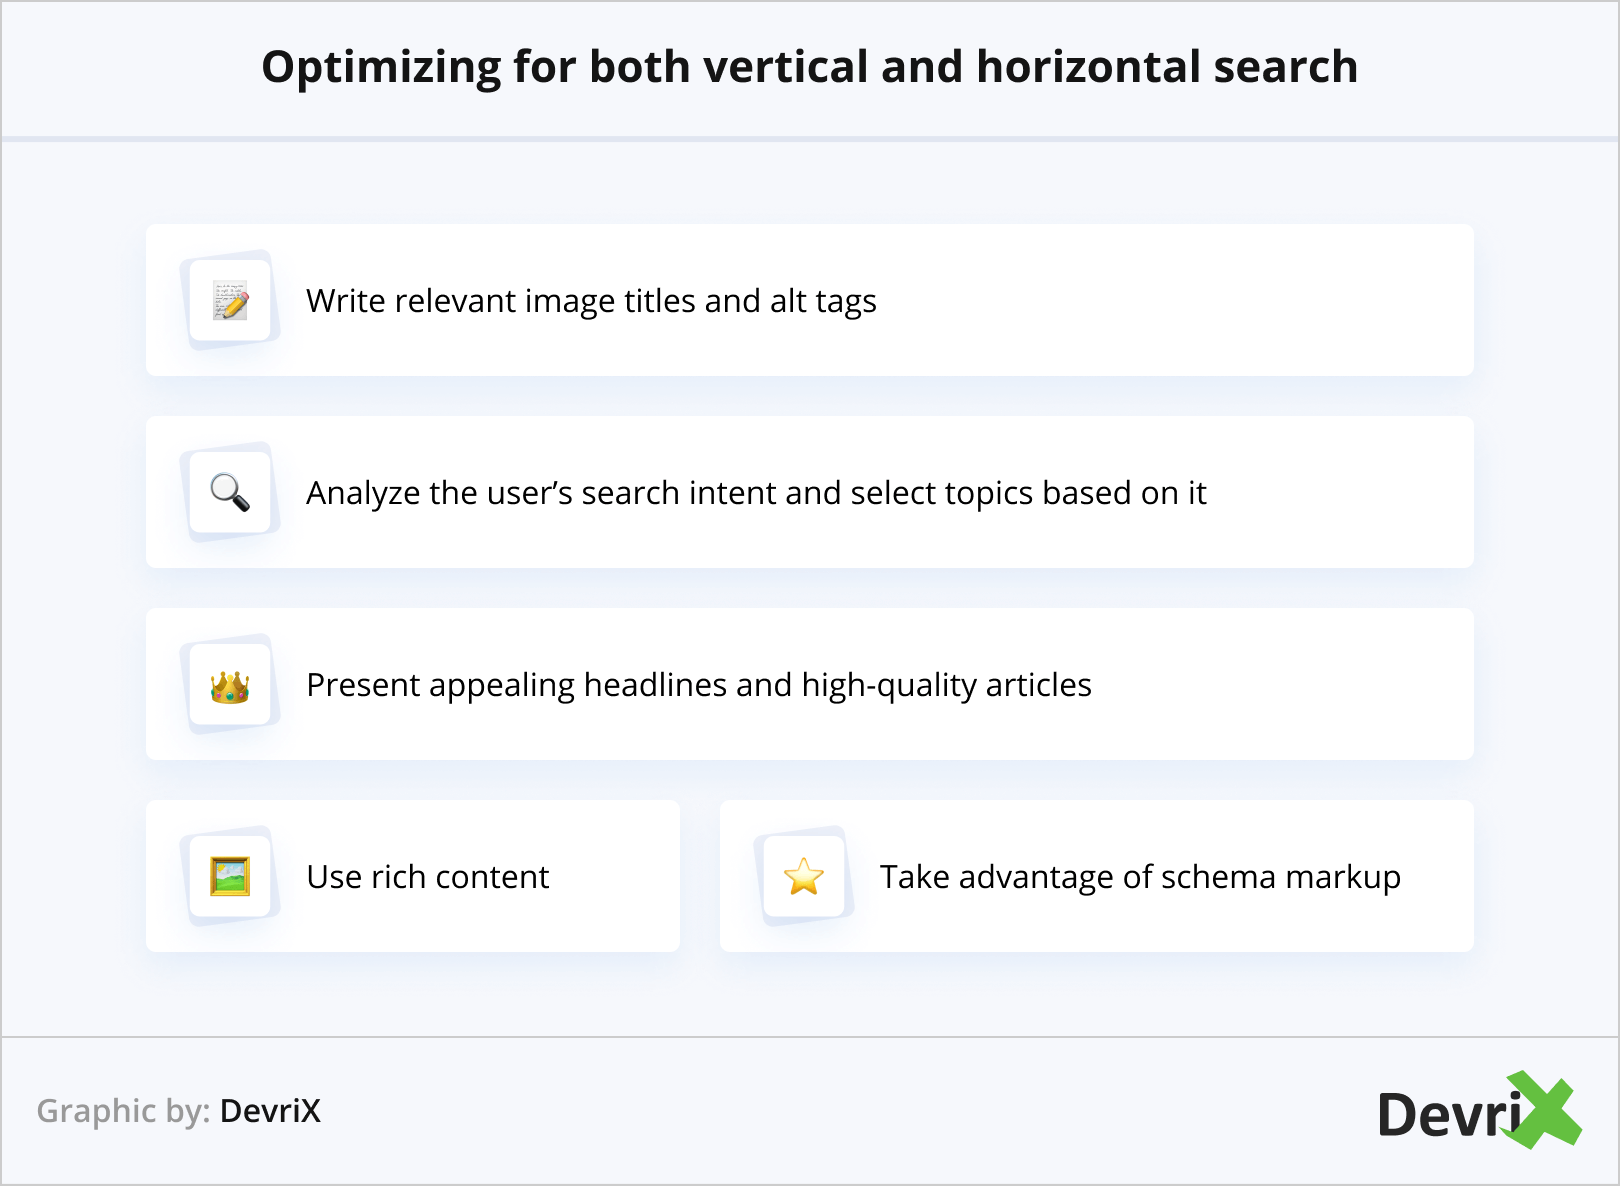 Optimizing for both Vertical and Horizontal Search